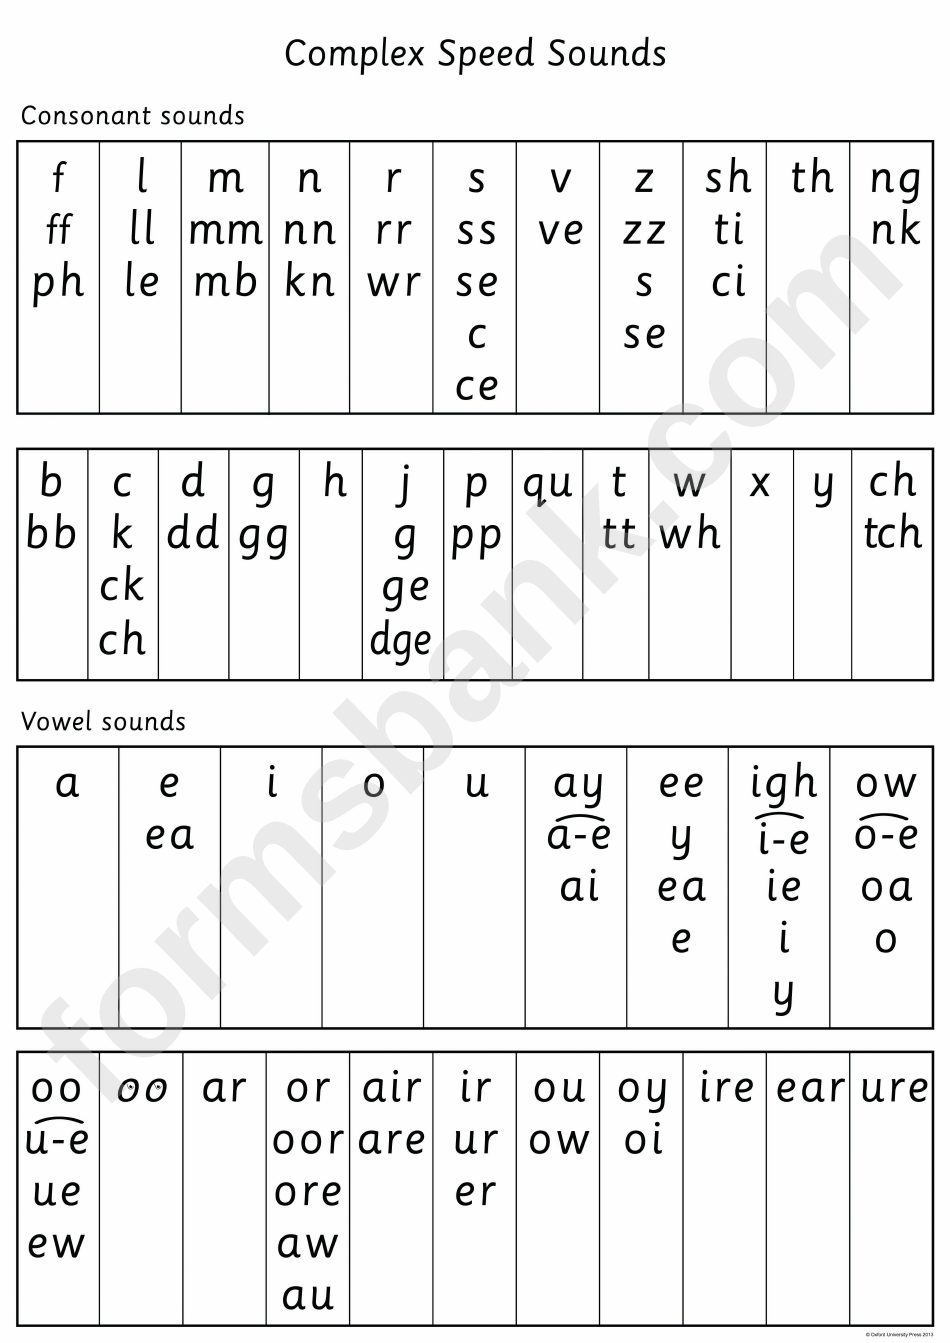 Complex Speed Sounds Chart printable pdf download